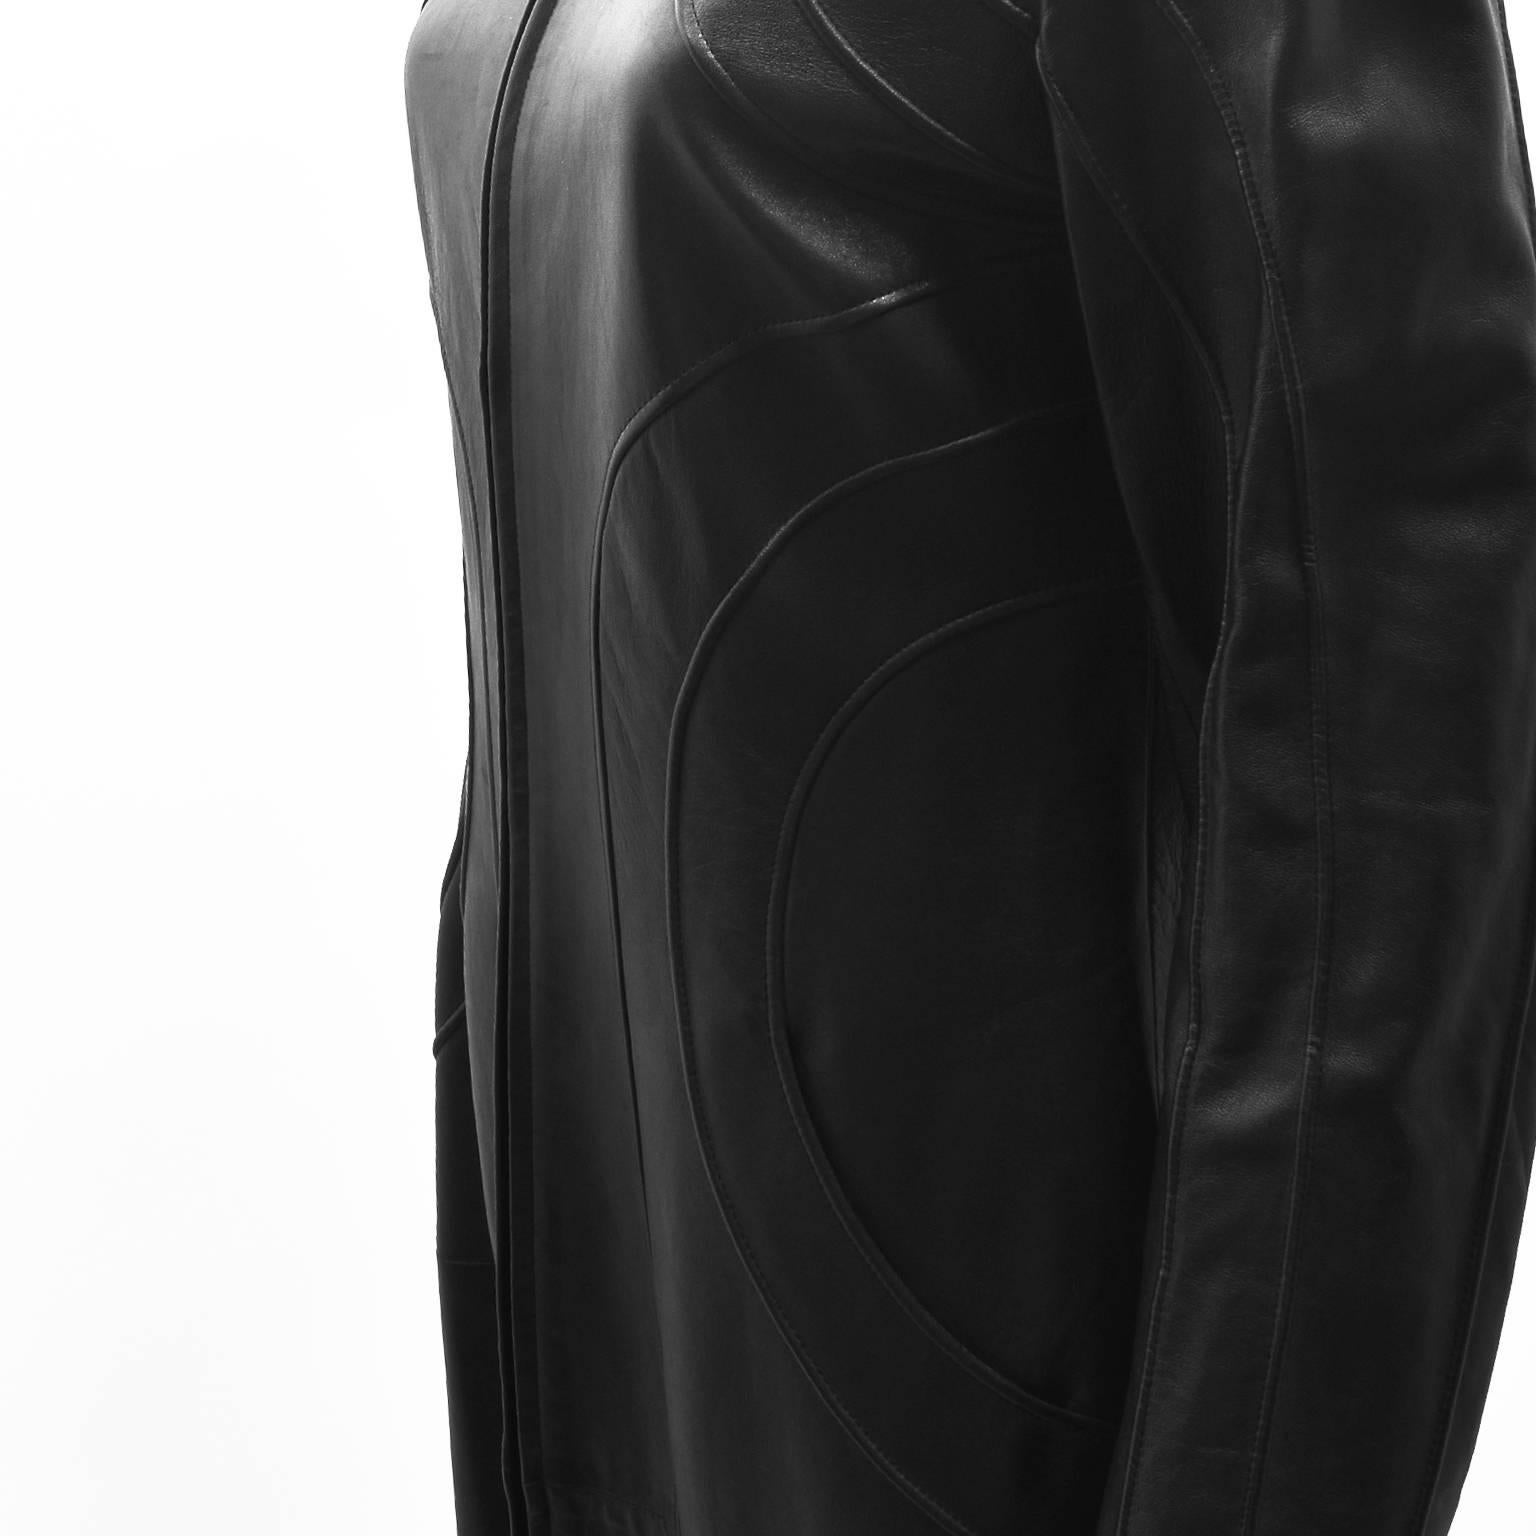 Thierry Mugler Black Leather Long Coat 1990’s  For Sale 2